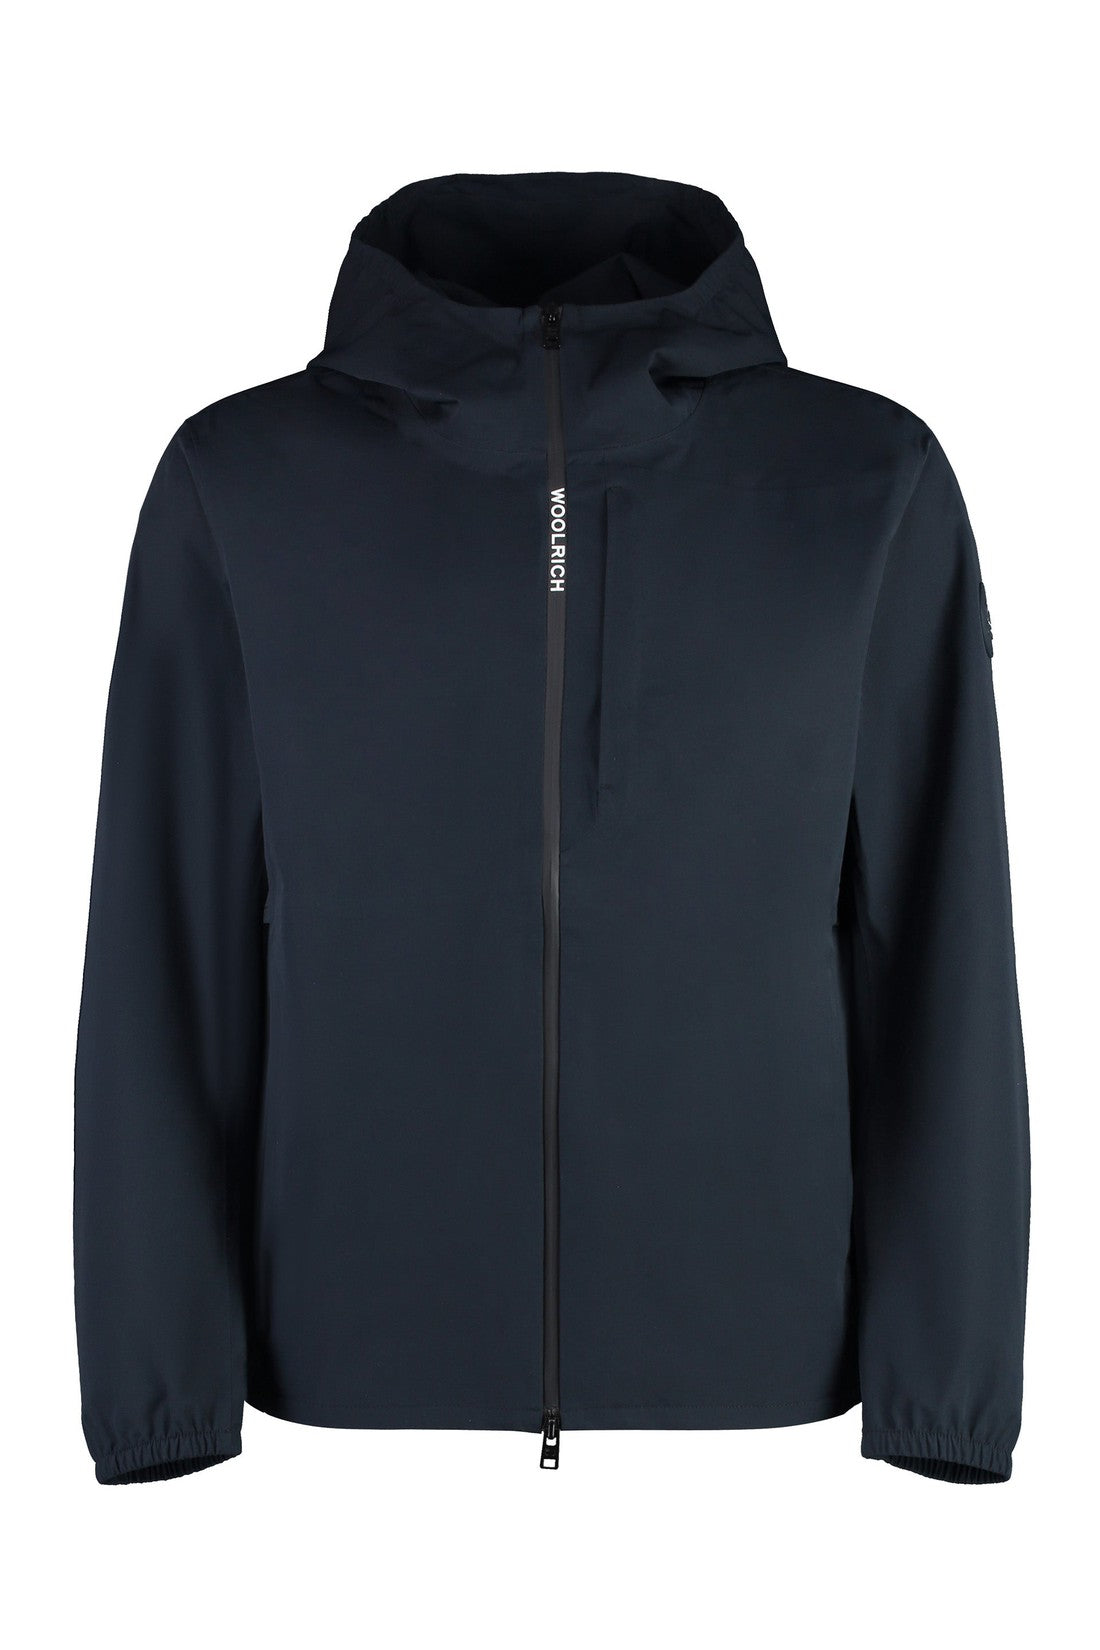 Woolrich-OUTLET-SALE-Pacific Hooded nylon jacket-ARCHIVIST